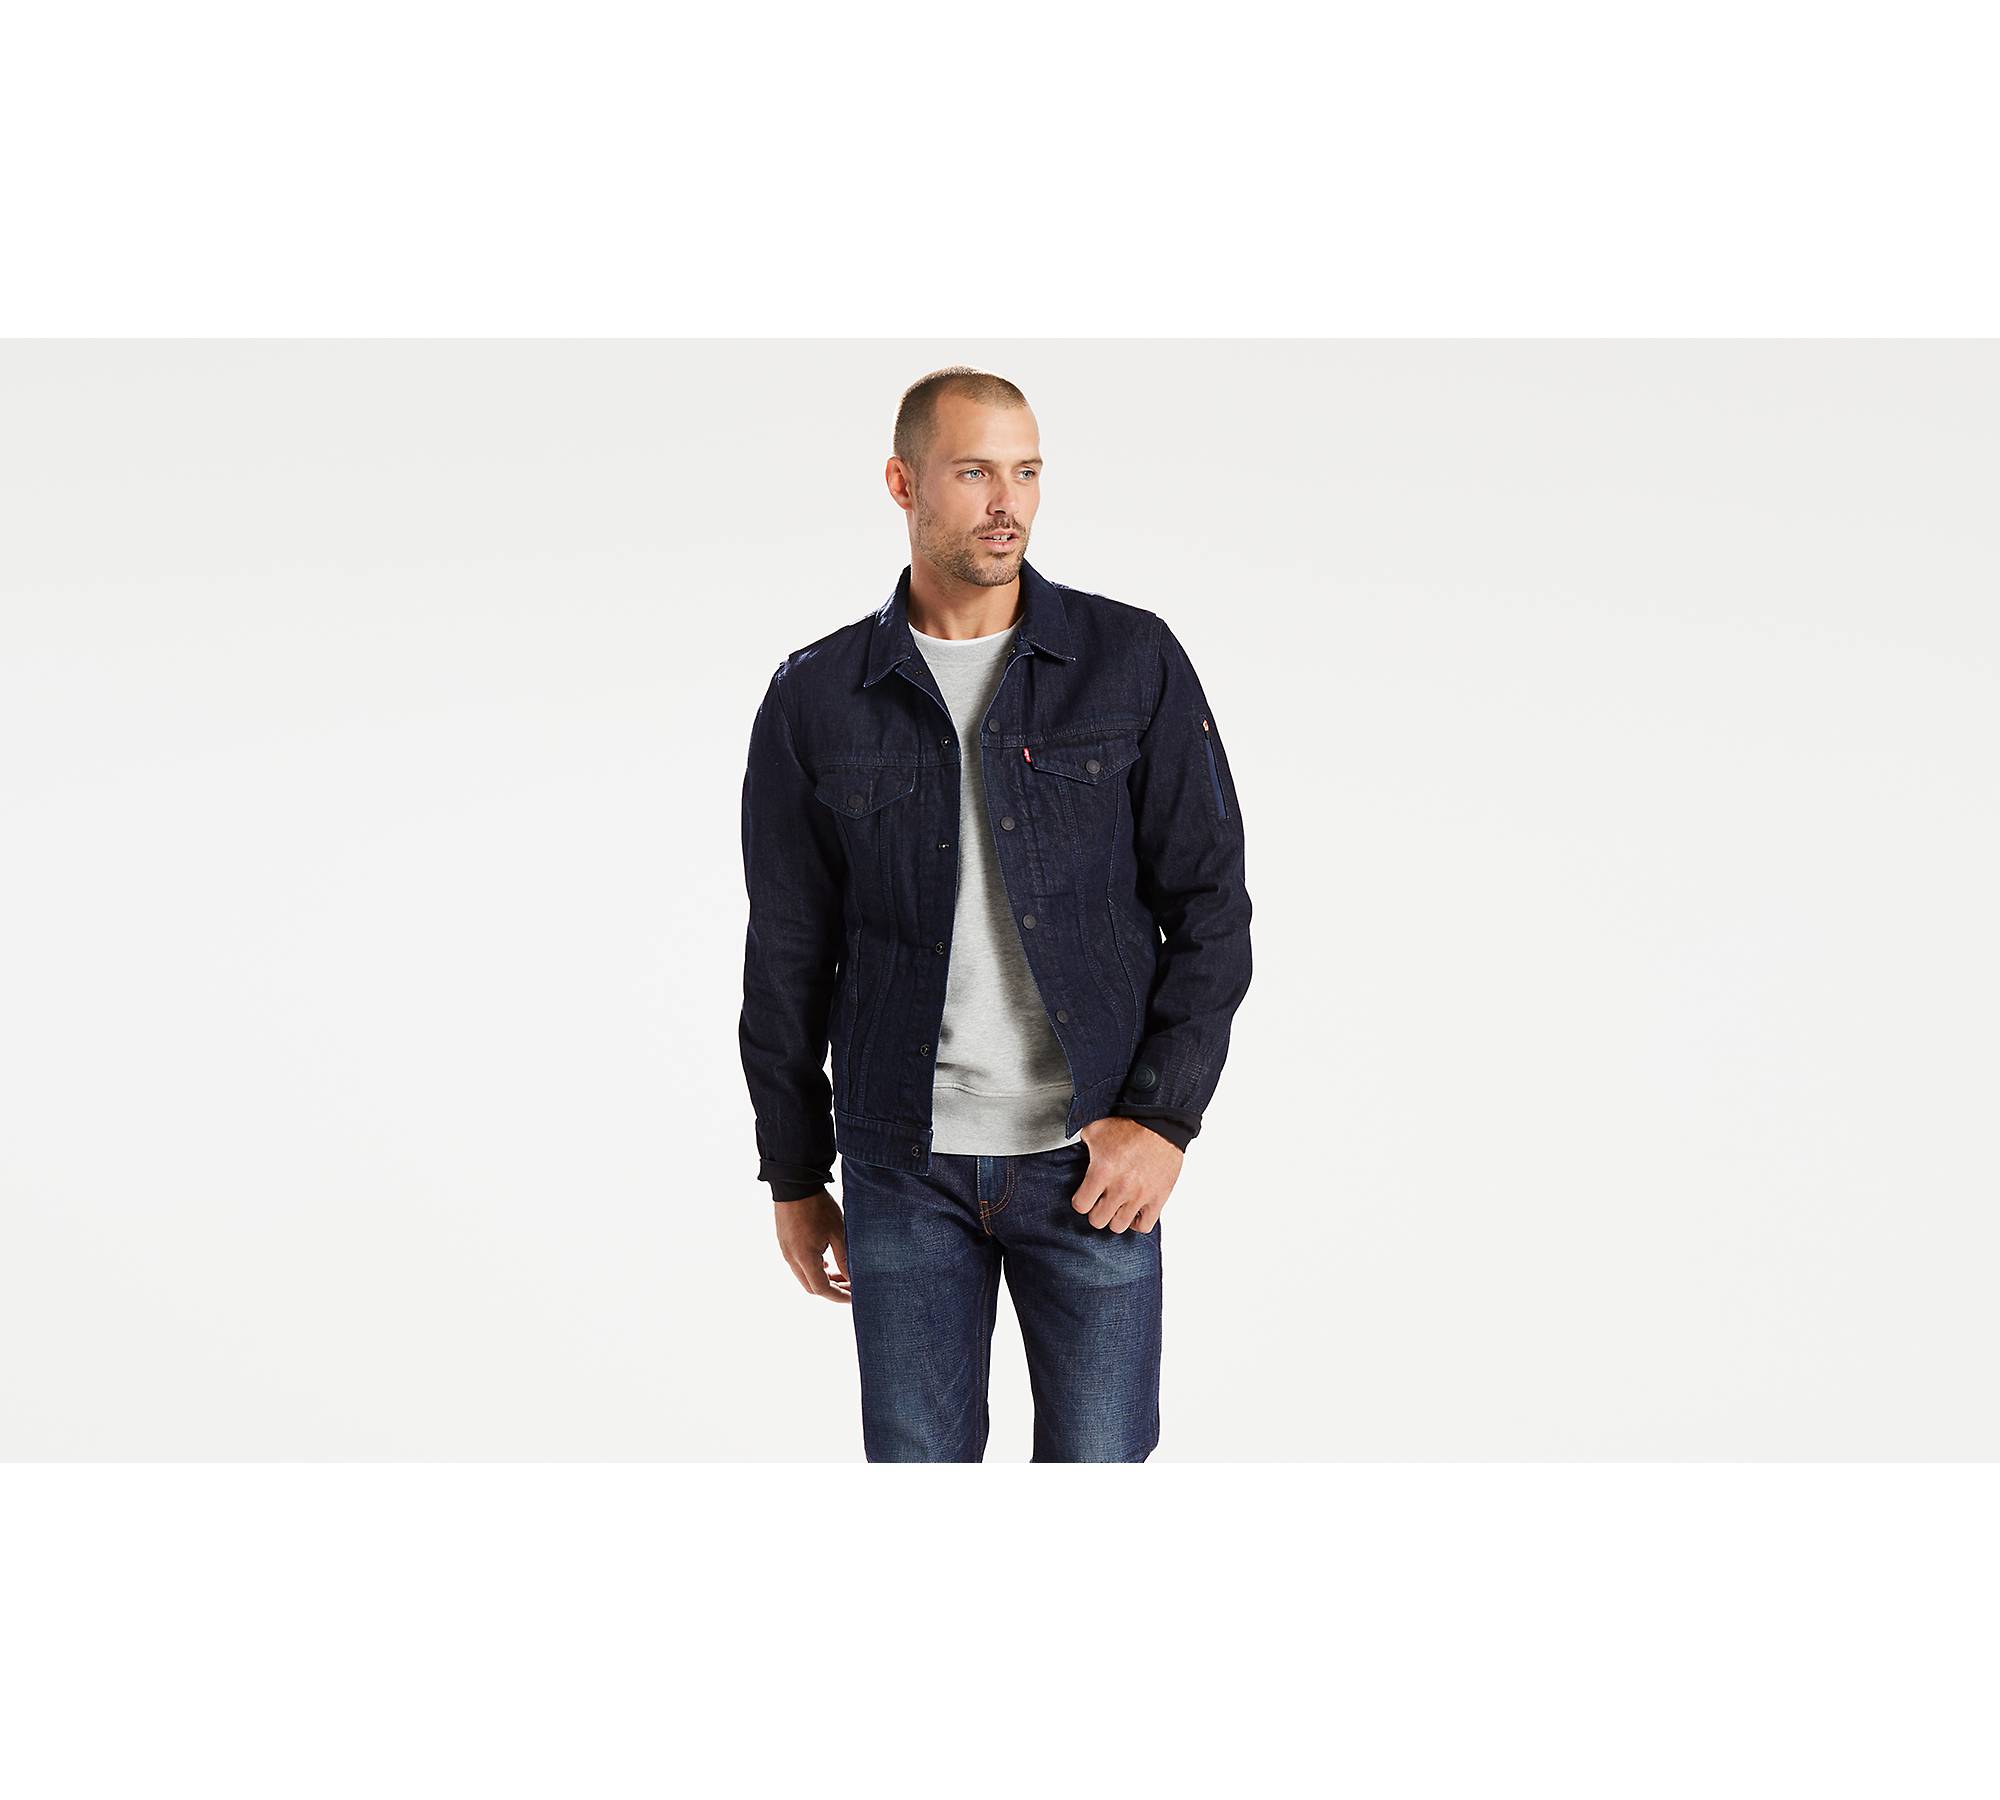 Levi's Commuter Trucker Jacket With Jacquard by Google Review​